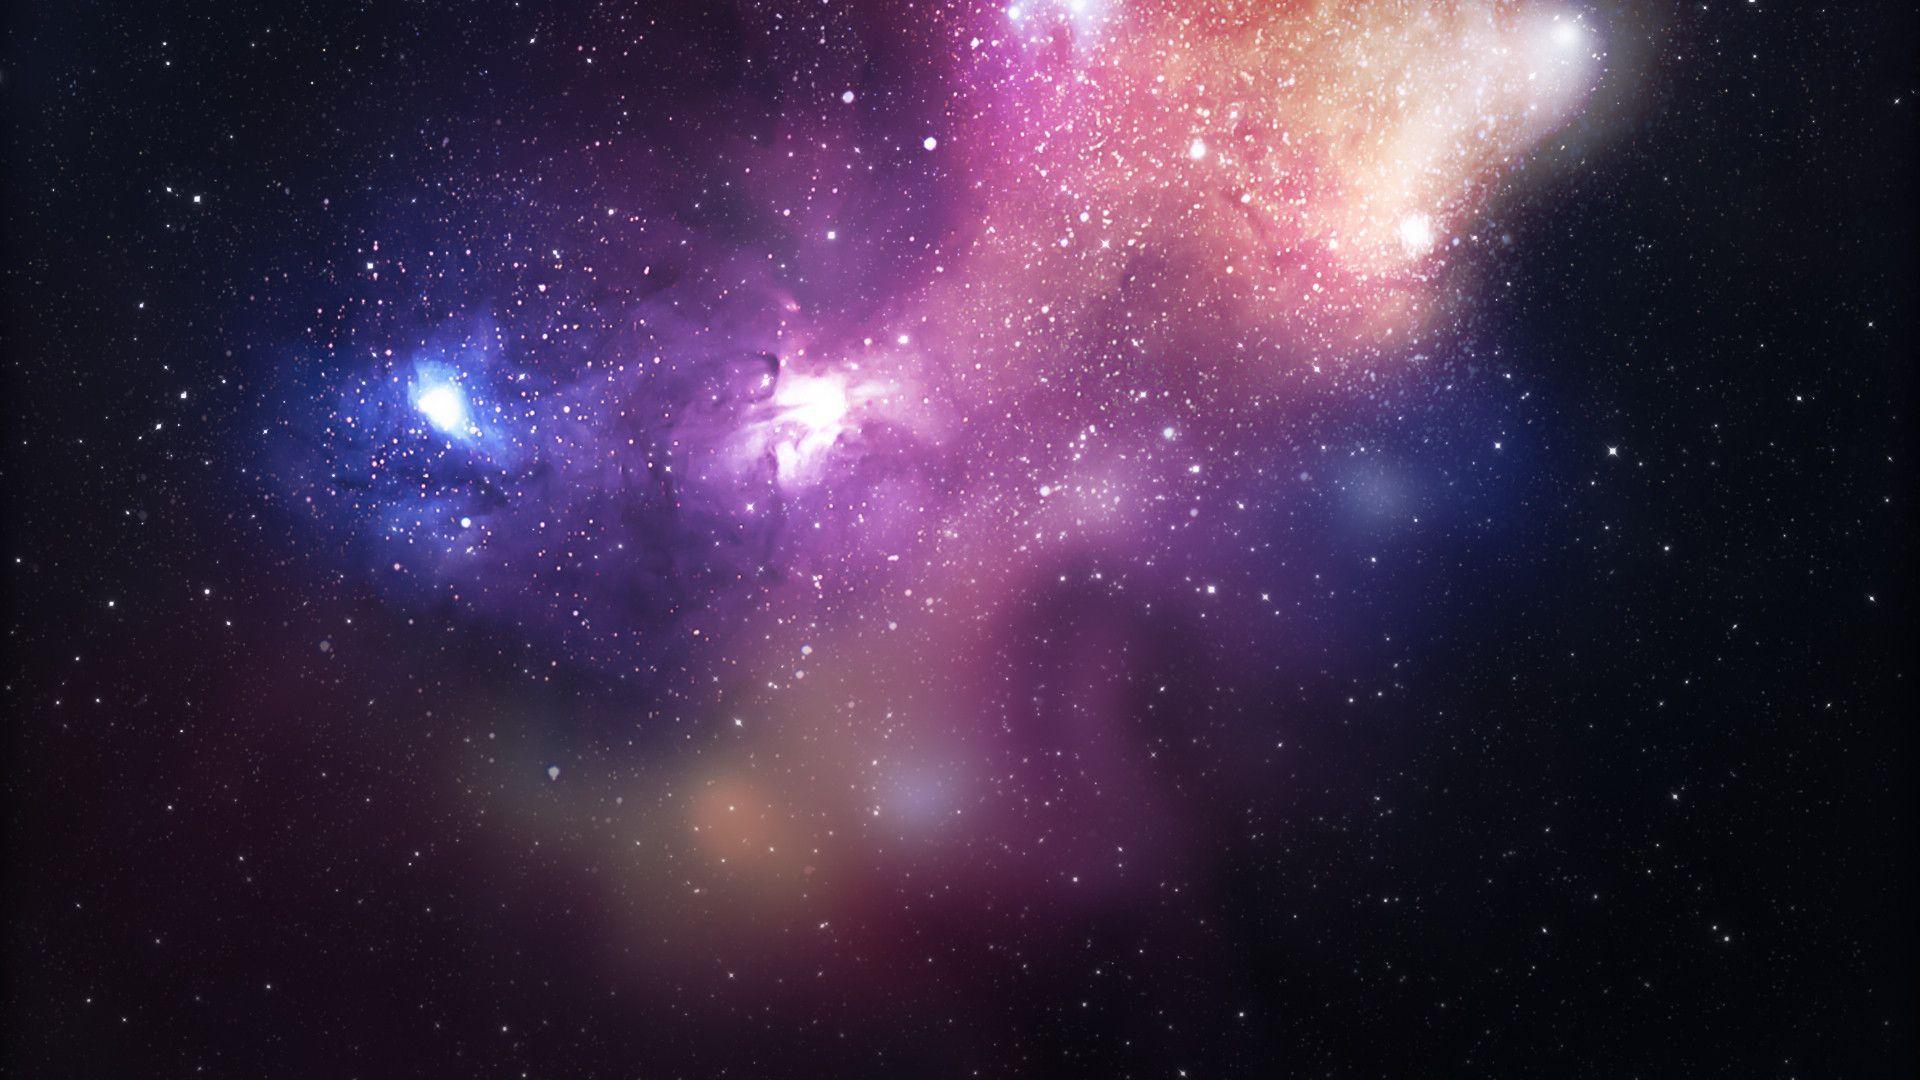 Awesome Space Wallpaper 7686 1920x1080 px